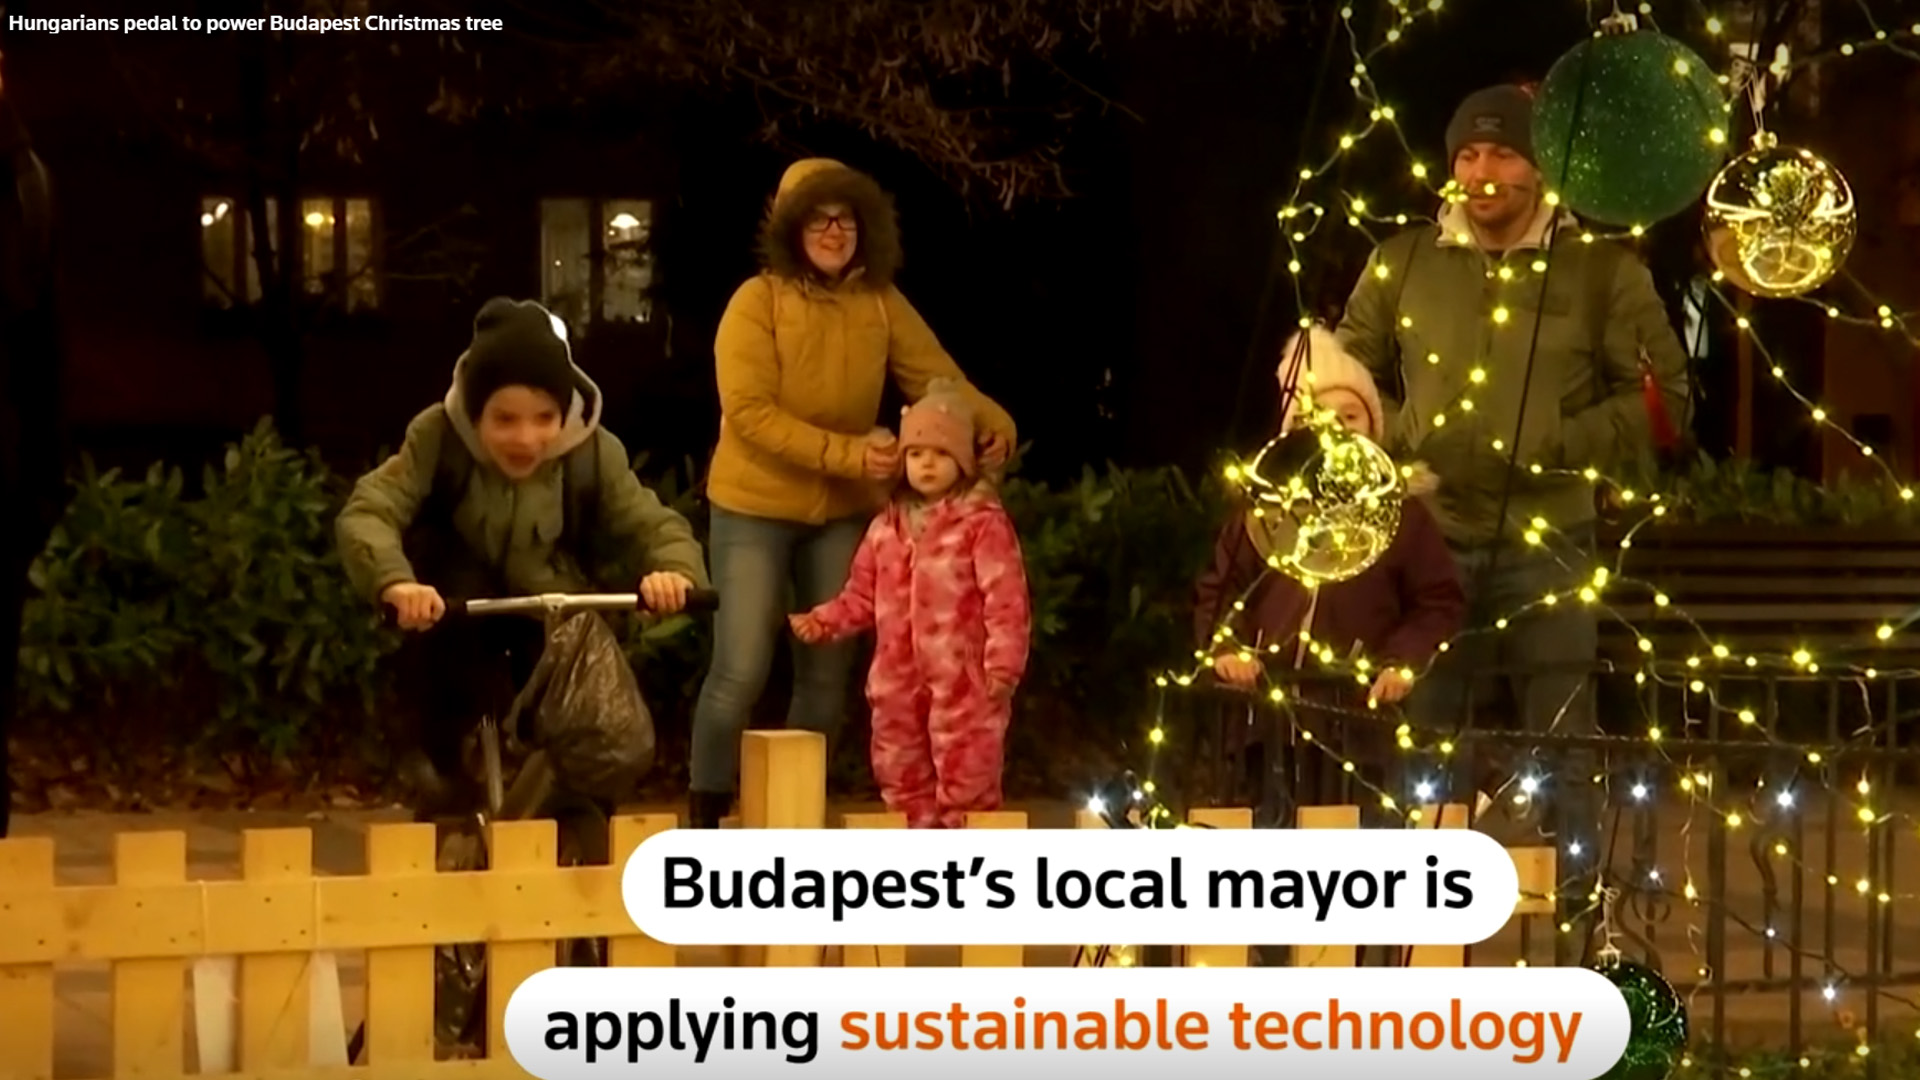 Watch: Locals Pedal to Power Budapest 2nd District Christmas Tree